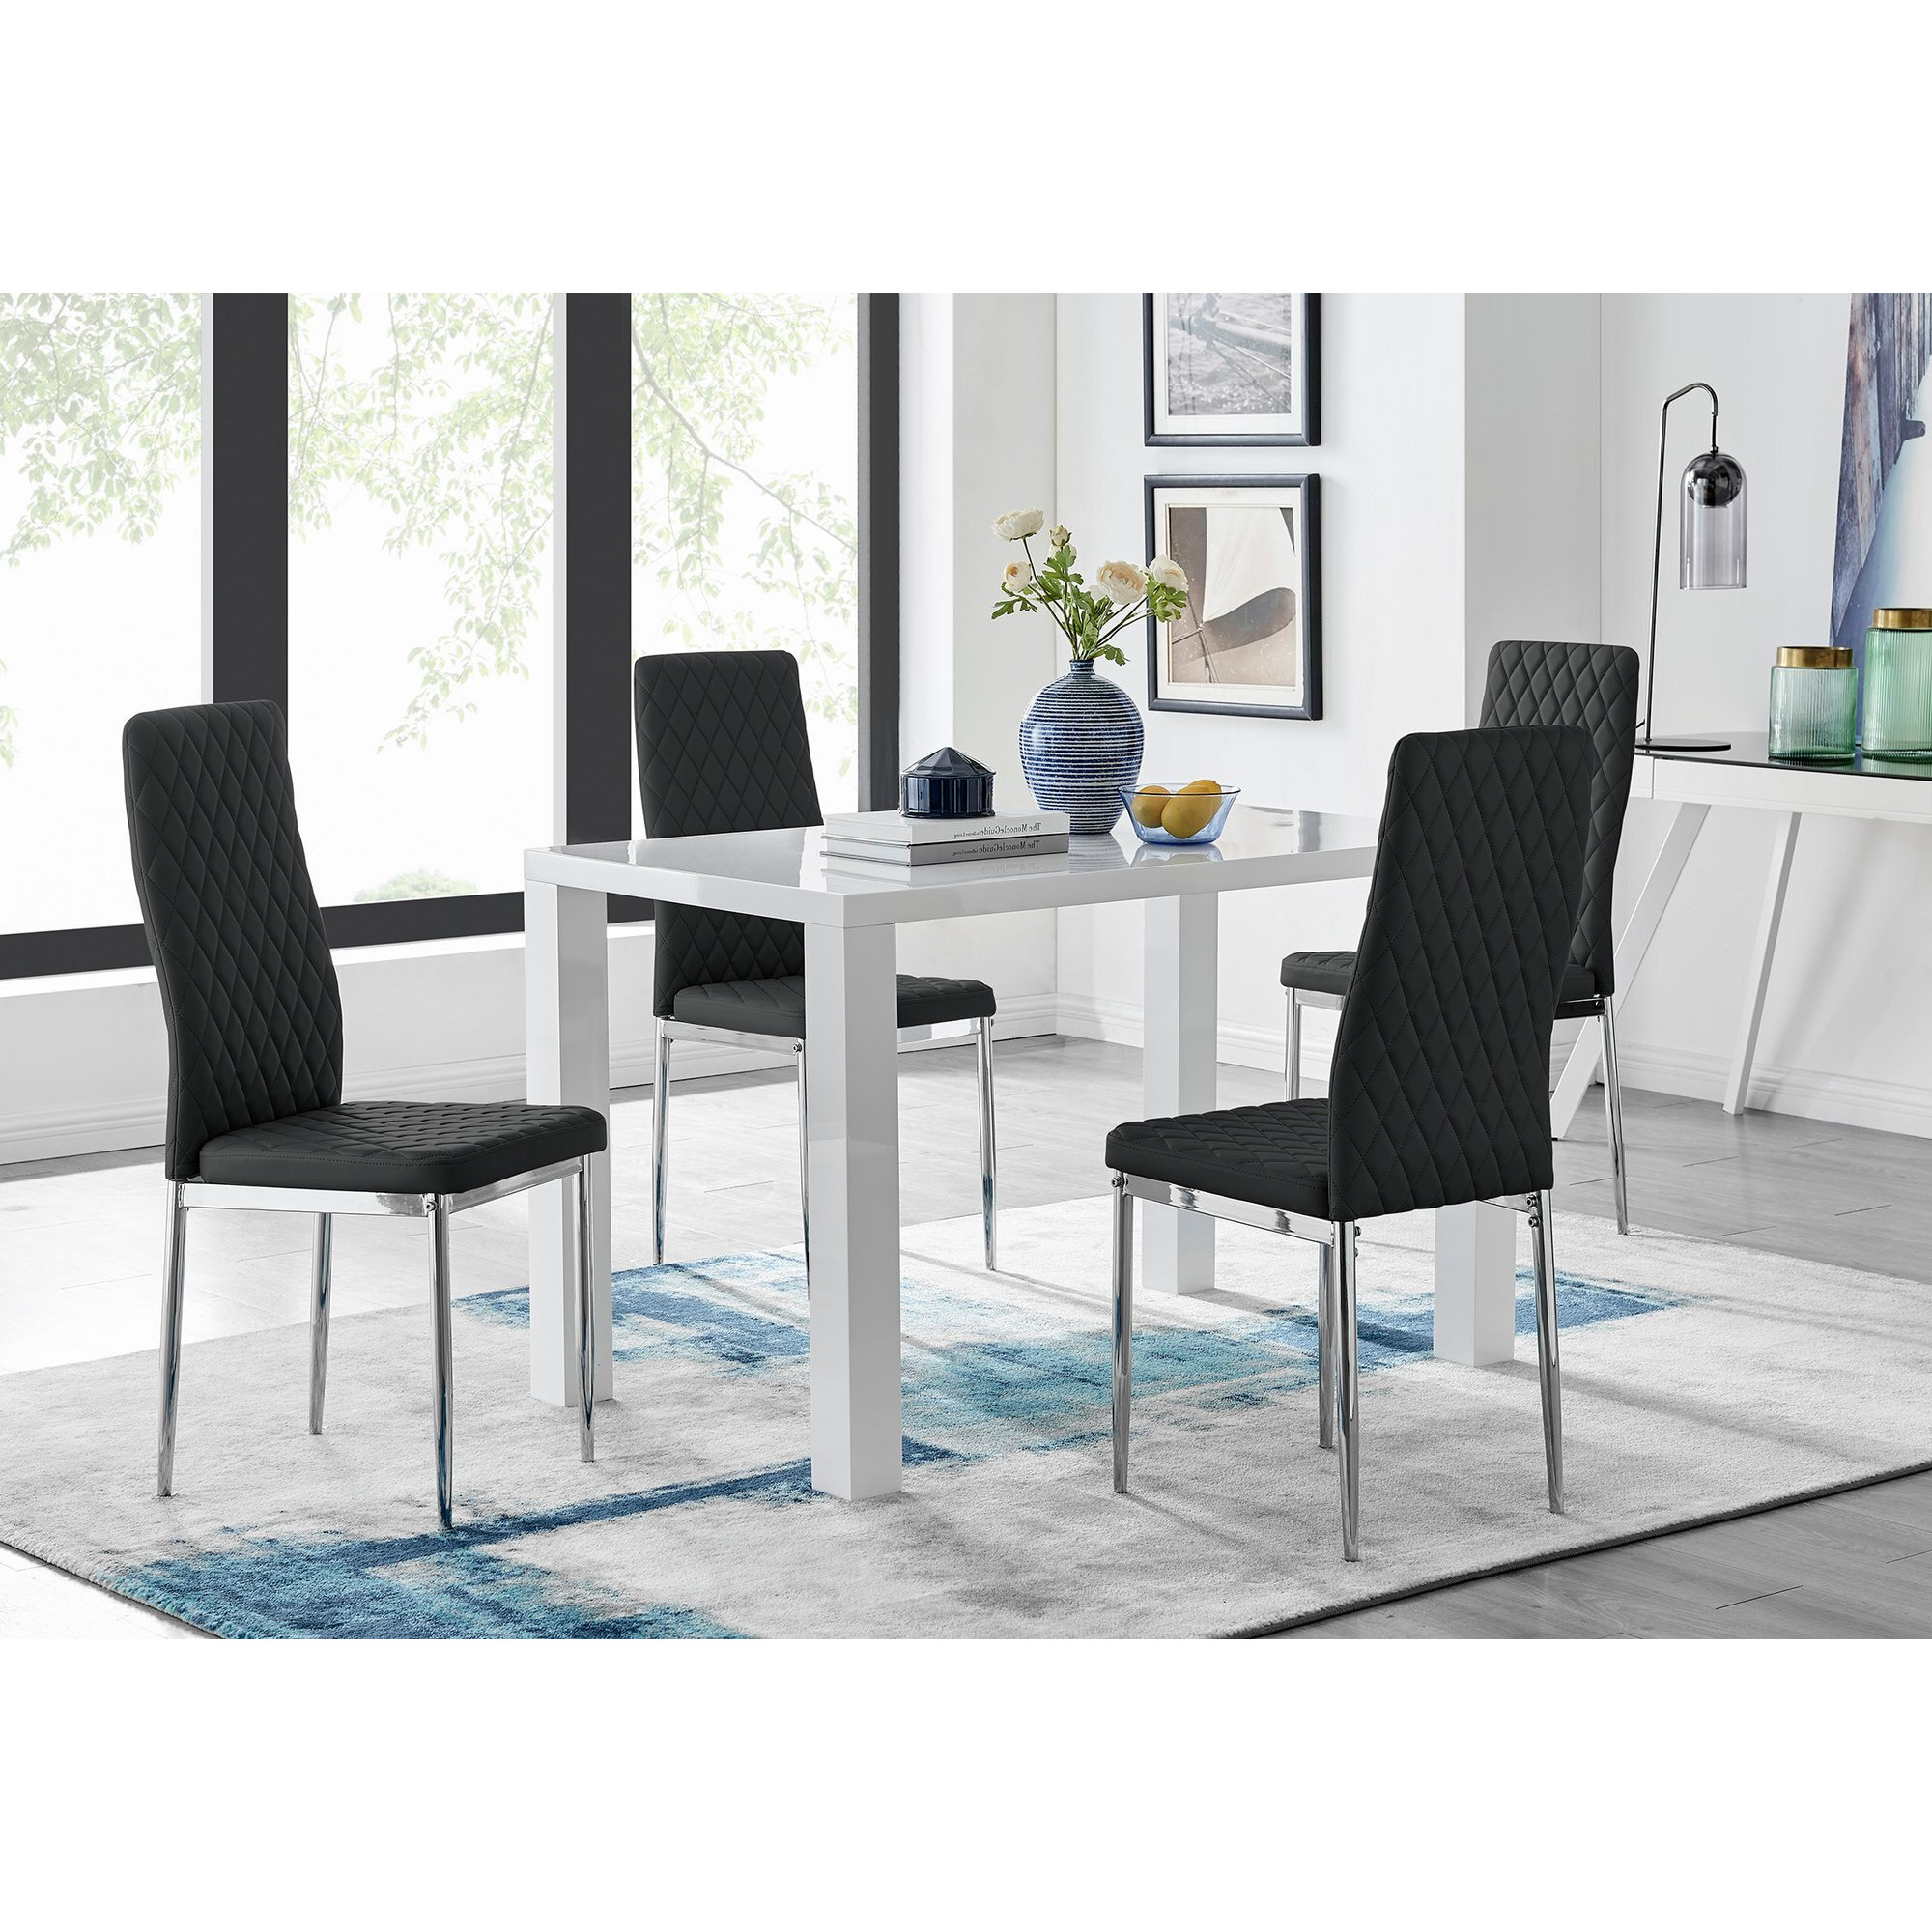 Pivero White High Gloss Dining Table and 4 Milan Chairs Set